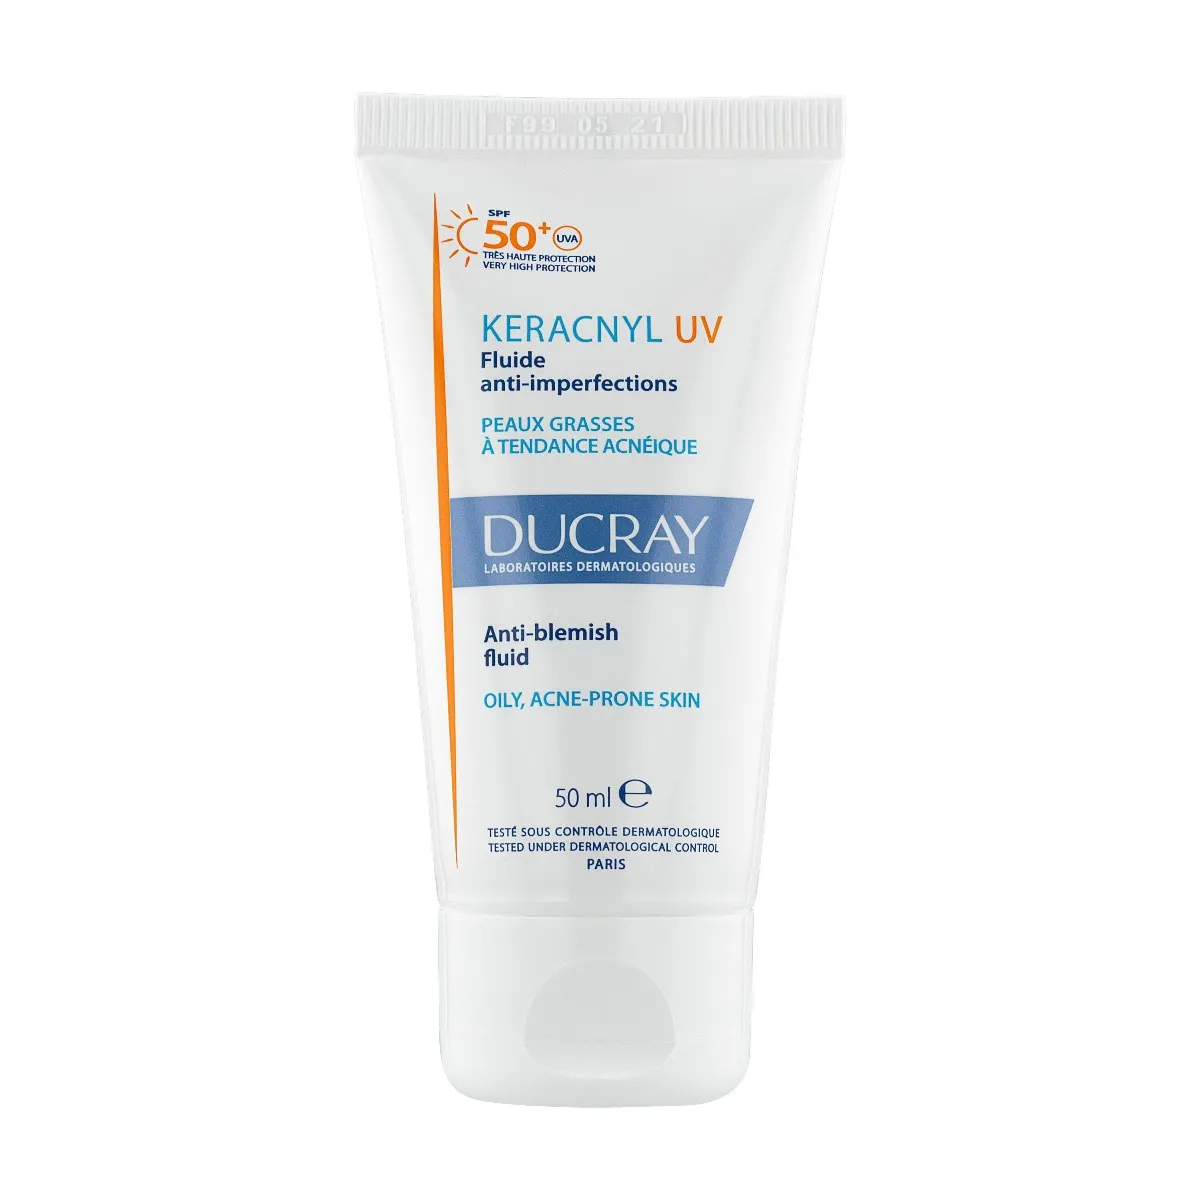 ducray keracnyl uv fluide anti-imperfections spf50+